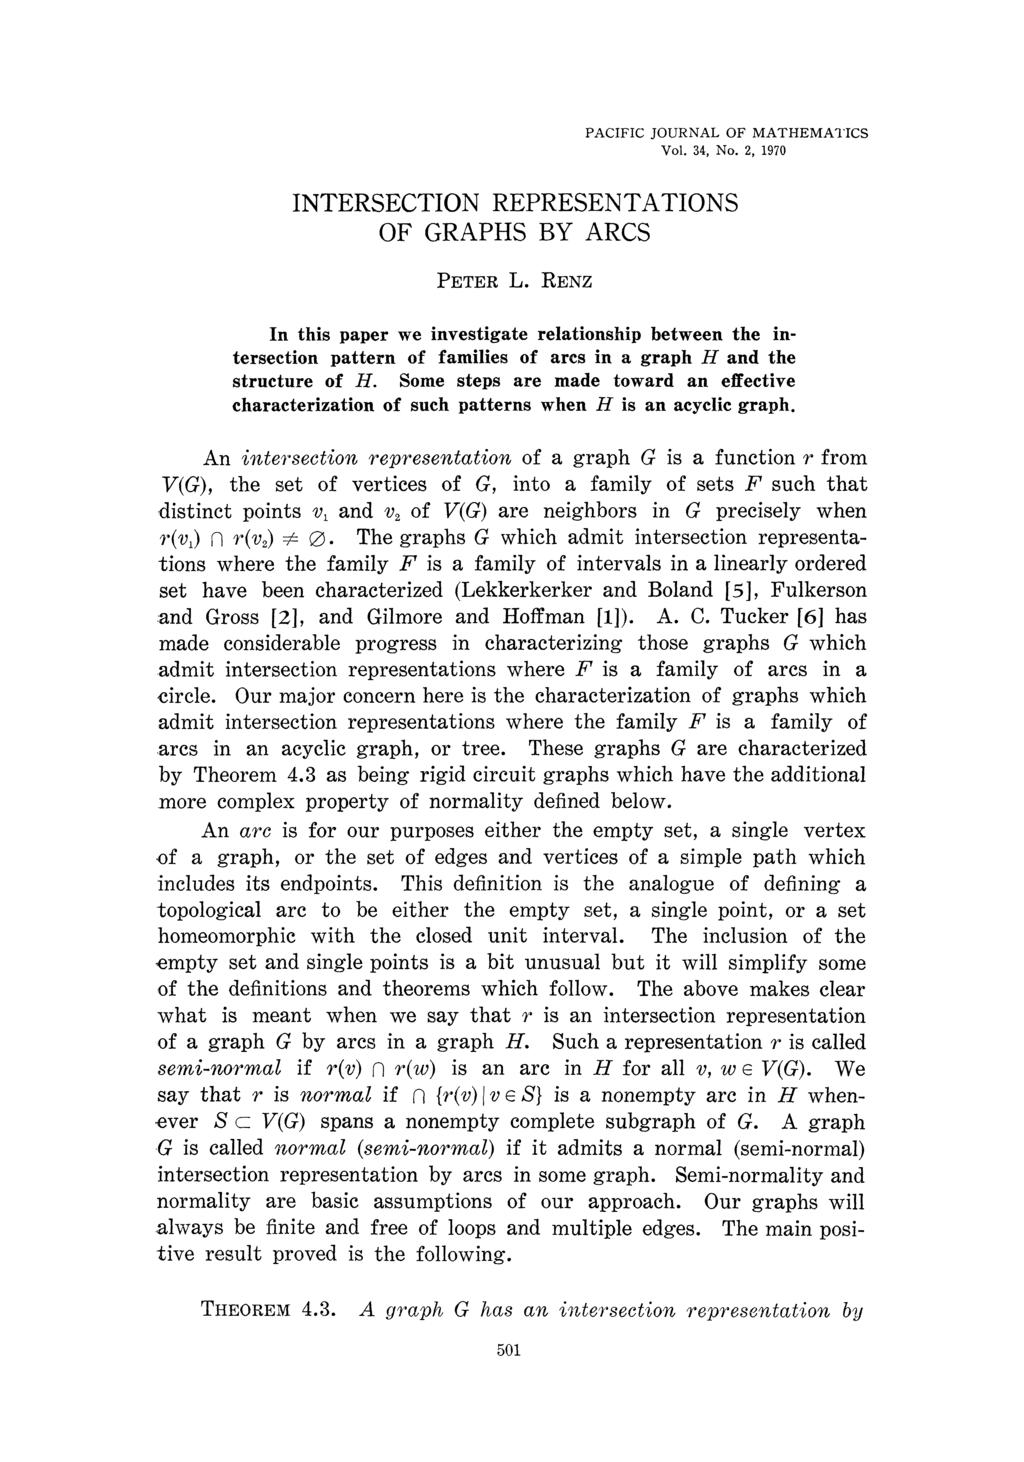 PACIFIC JOURNAL OF MATHEMATICS Vol. 34, No. 2, 1970 INTERSECTION REPRESENTATIONS OF GRAPHS BY ARCS PETER L.